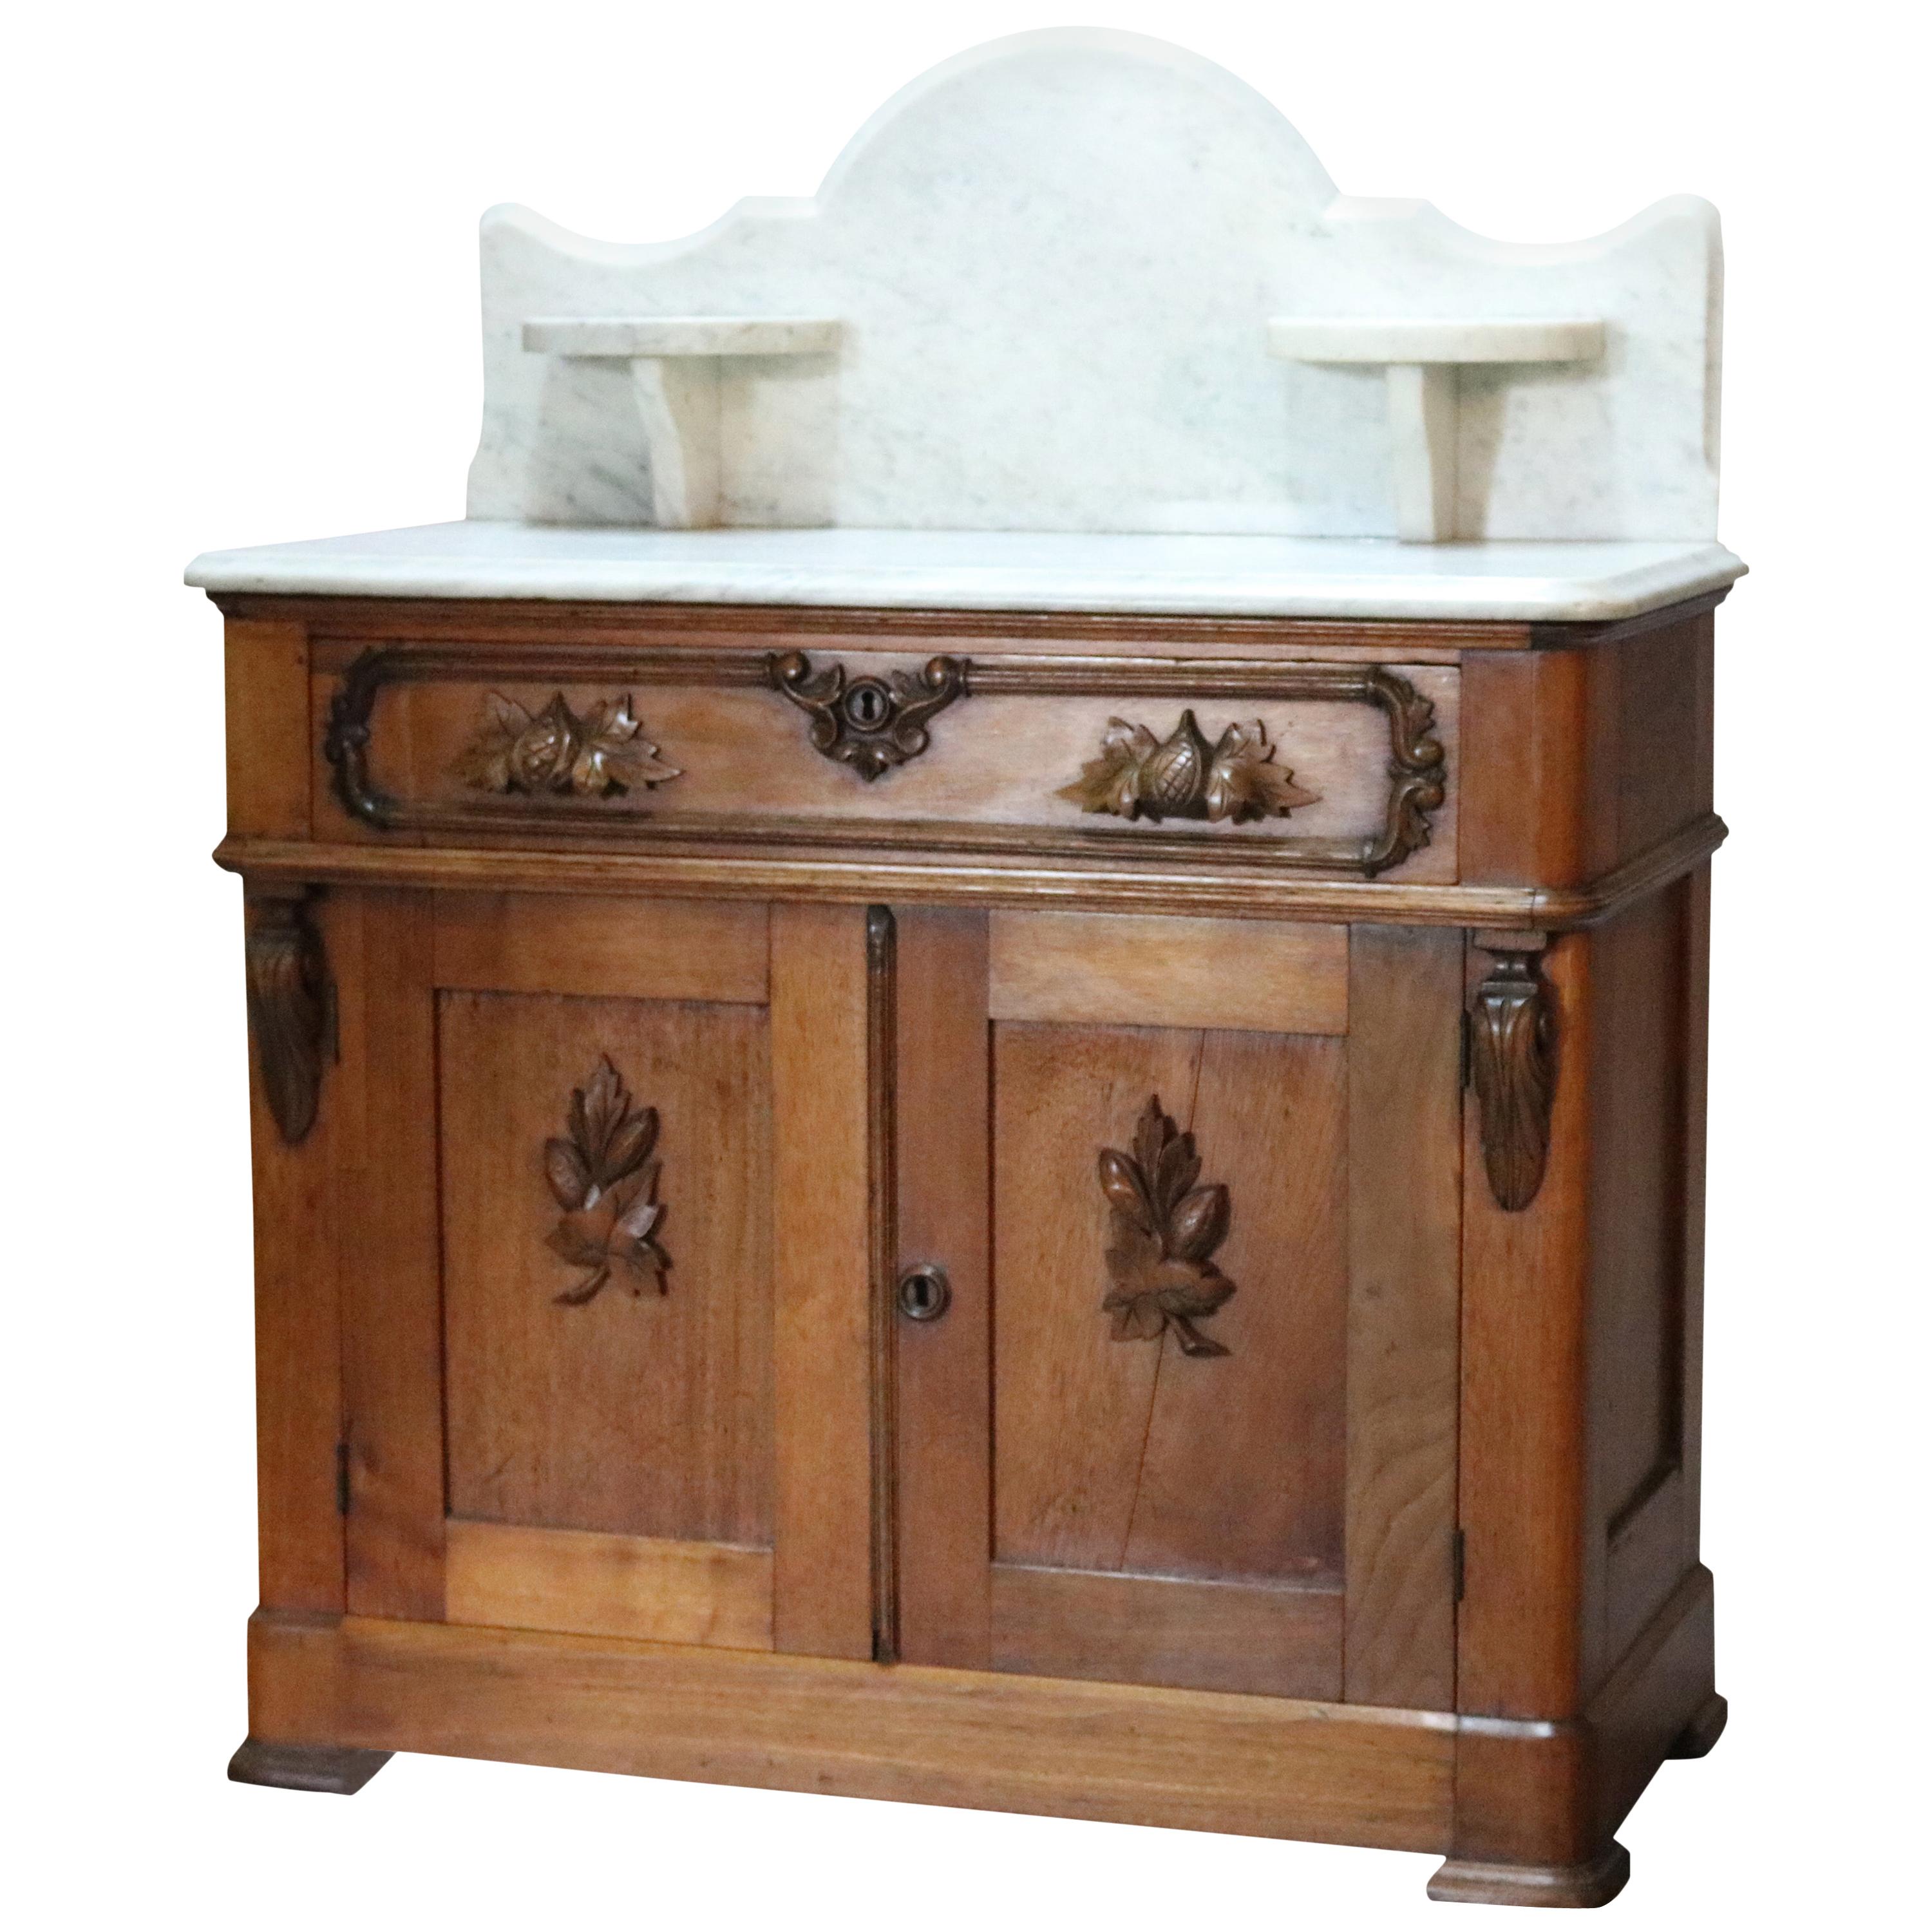 Antique Victorian Carved Walnut Marble-Top Commode with Candle Stands